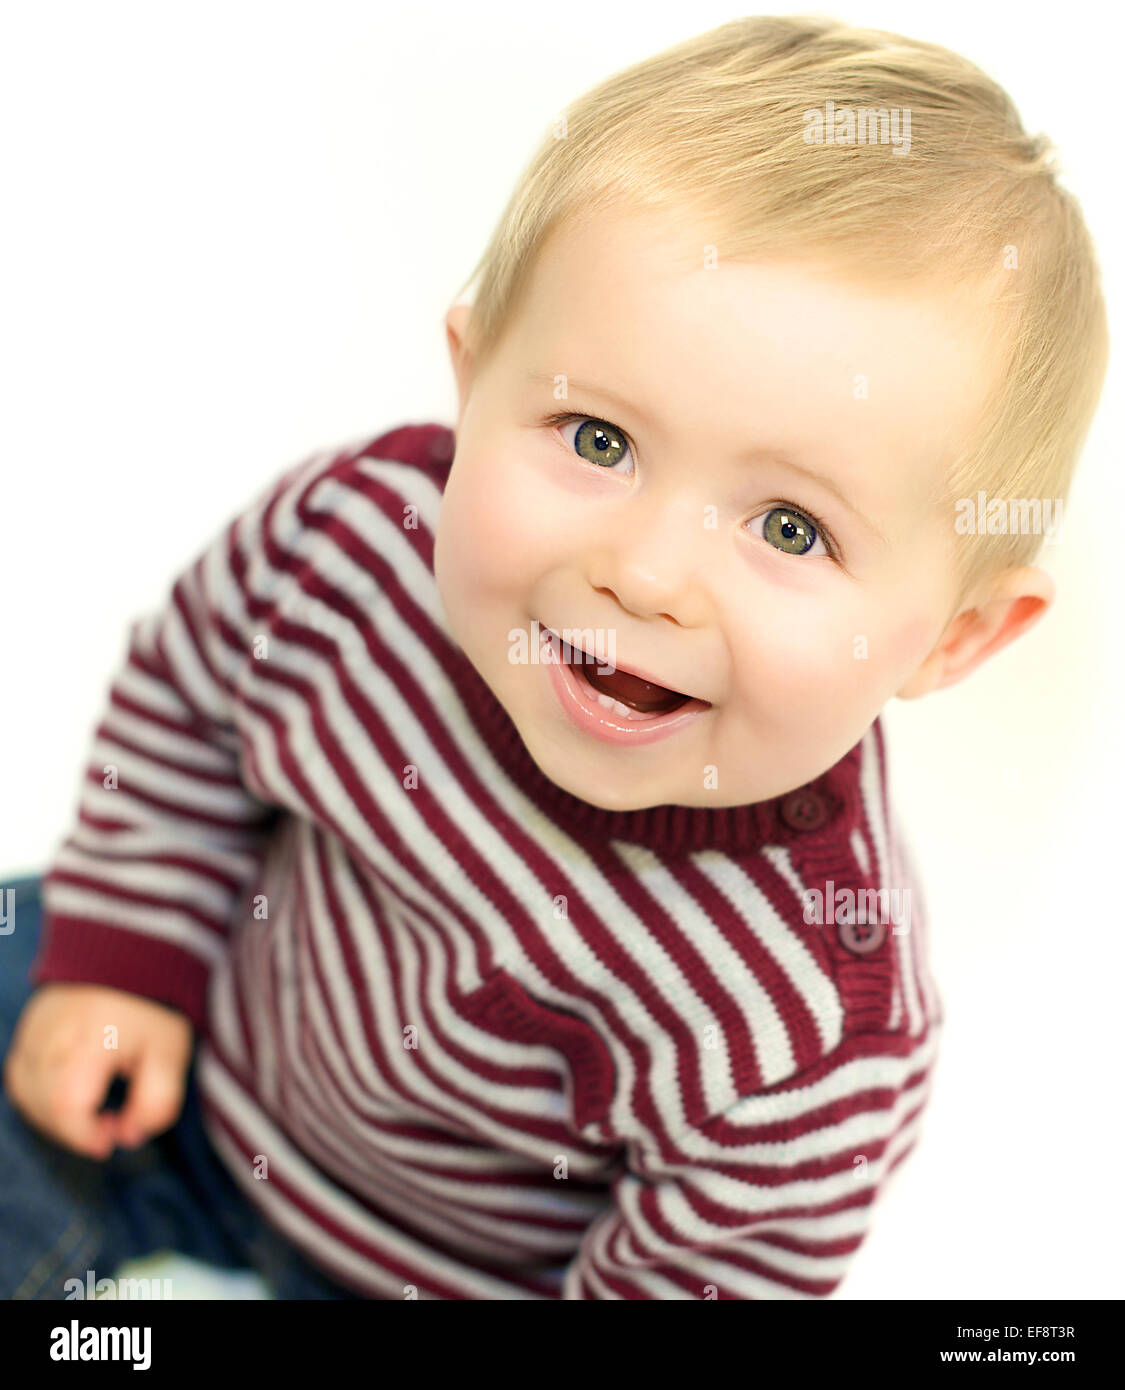 portrait of a smiling baby boy Stock Photo